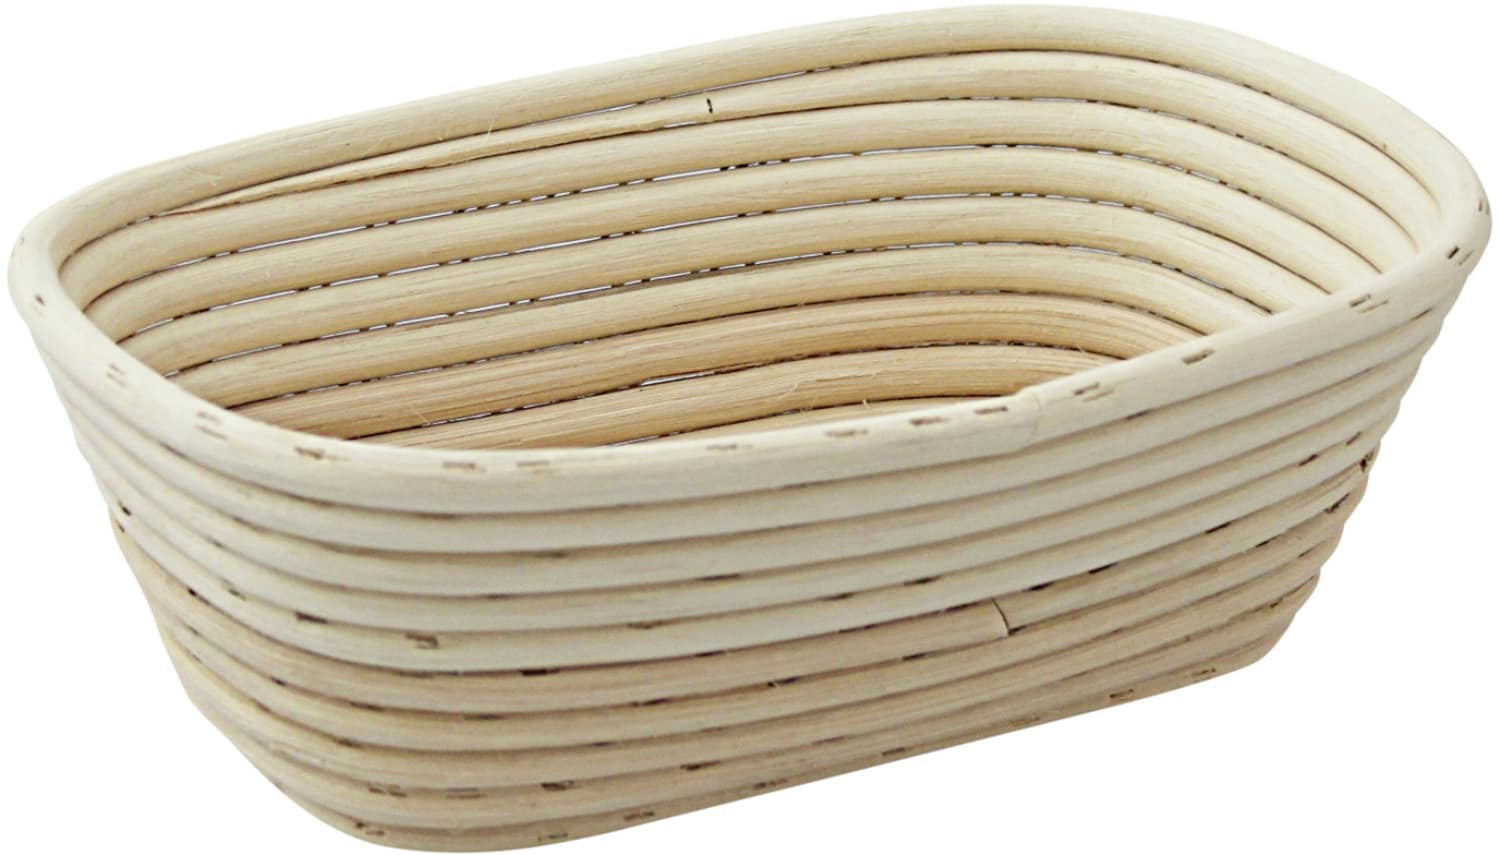 Bread proofing baskets long, round shape plaited bottom